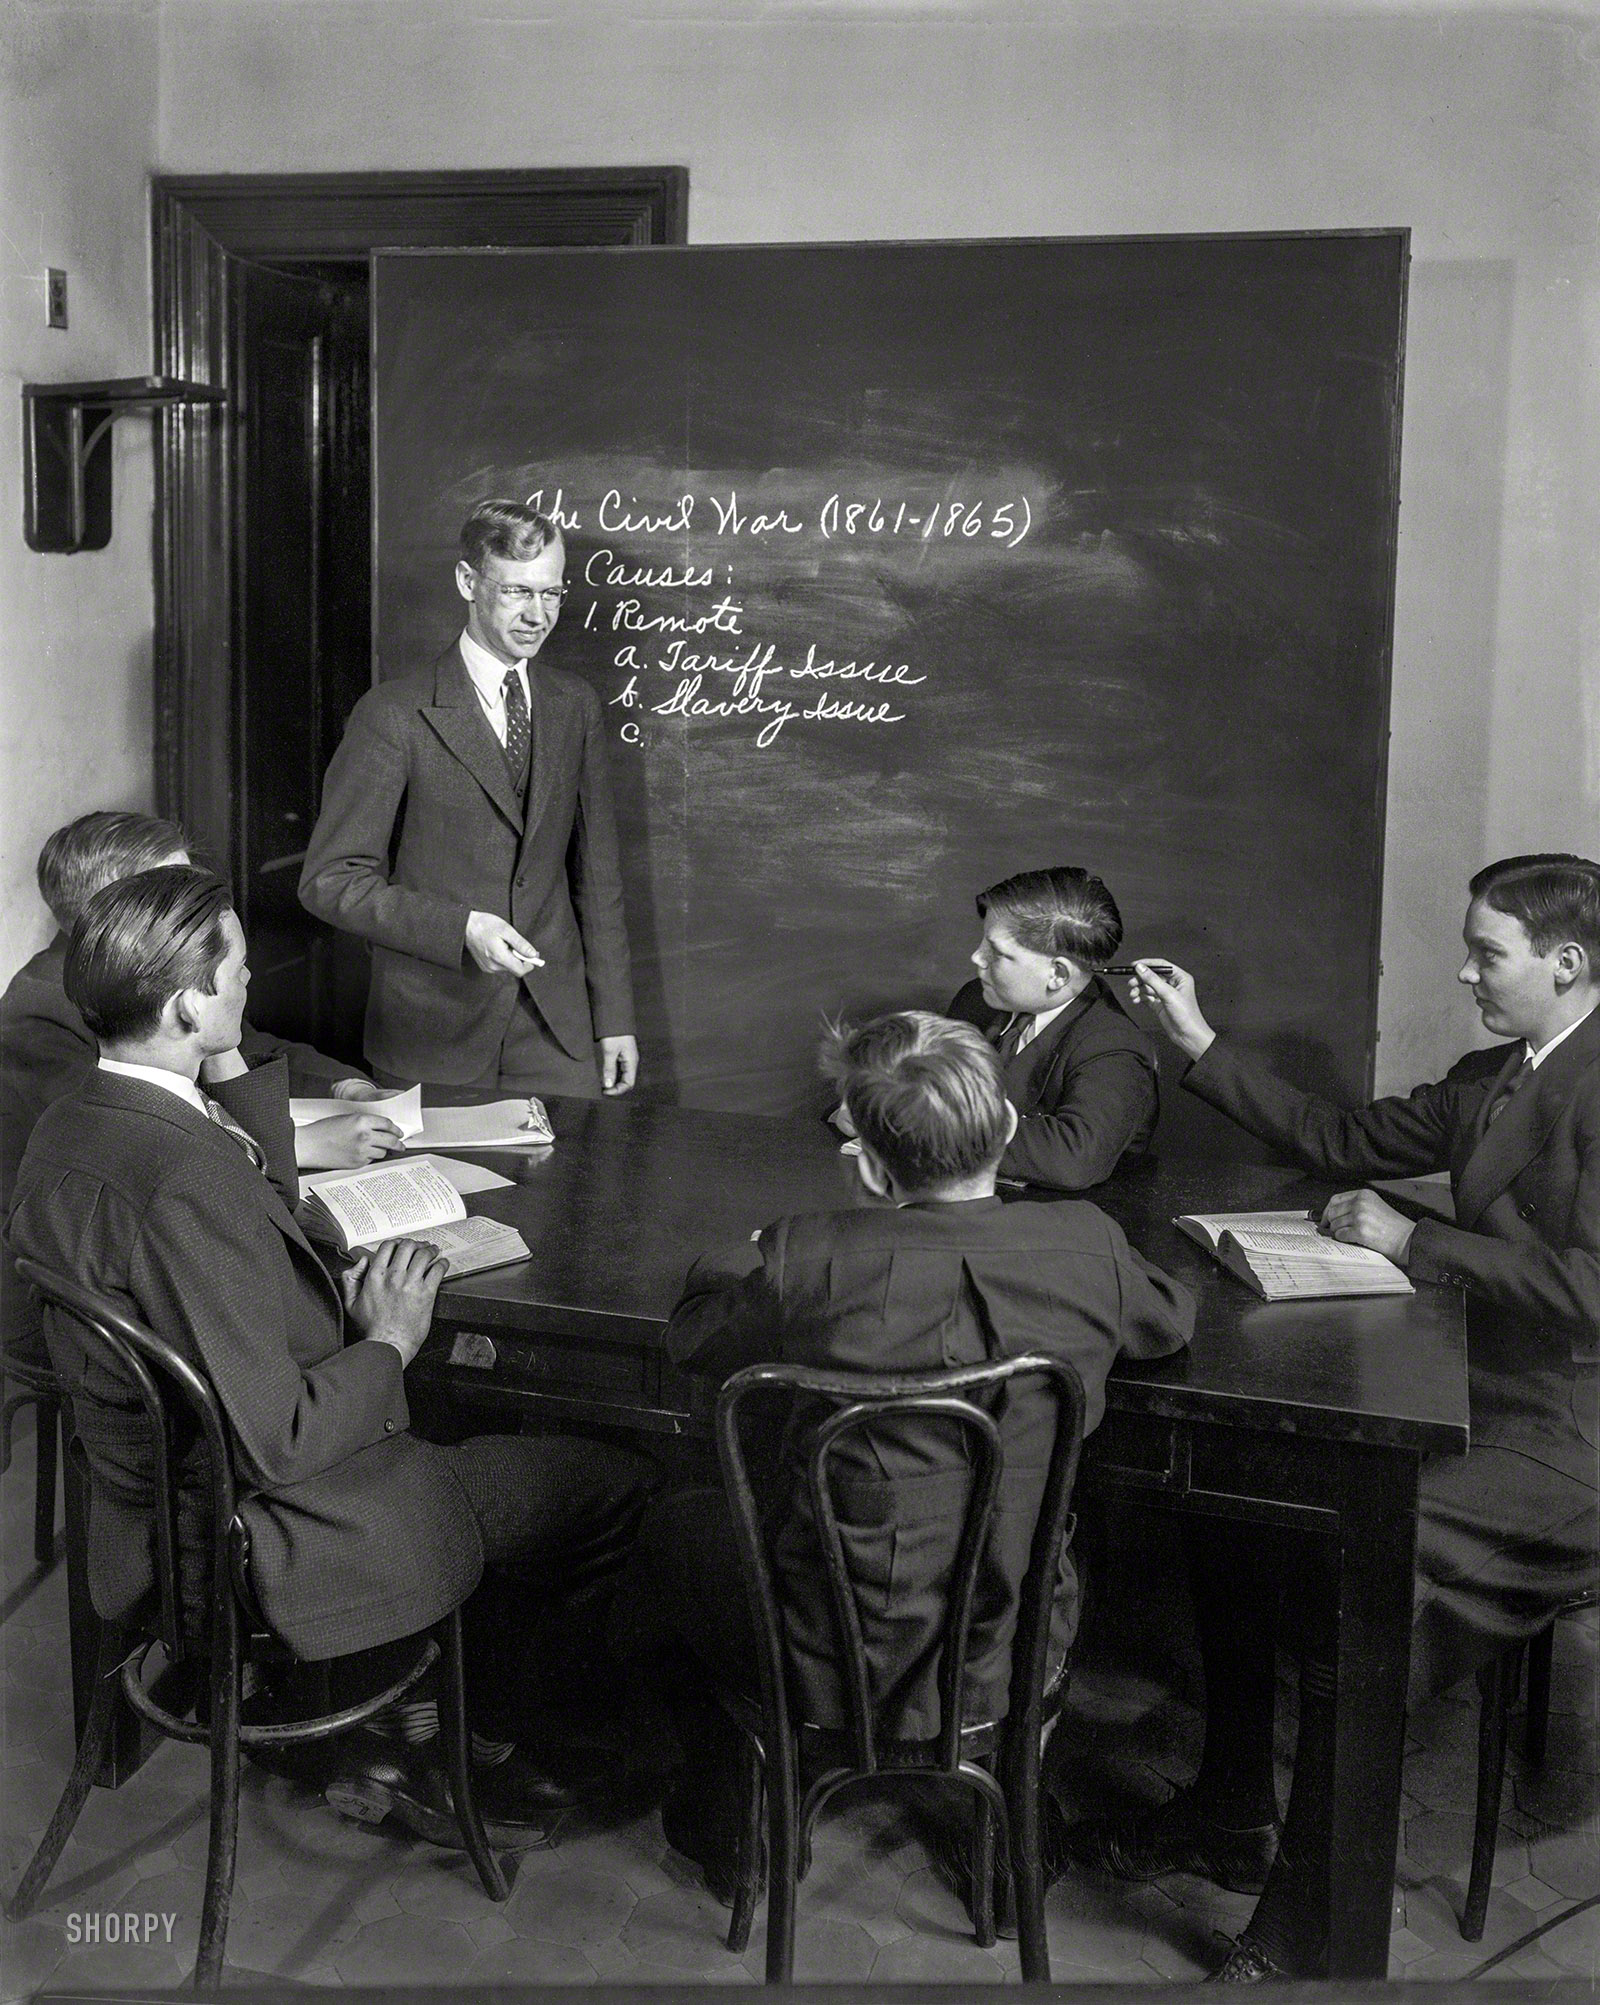 Washington, D.C., circa 1940. "Ernest Kendall, teacher of U.S. Capitol pages." Note old-school schoolboy mischief. Photo by Theodor Horydczak. View full size.